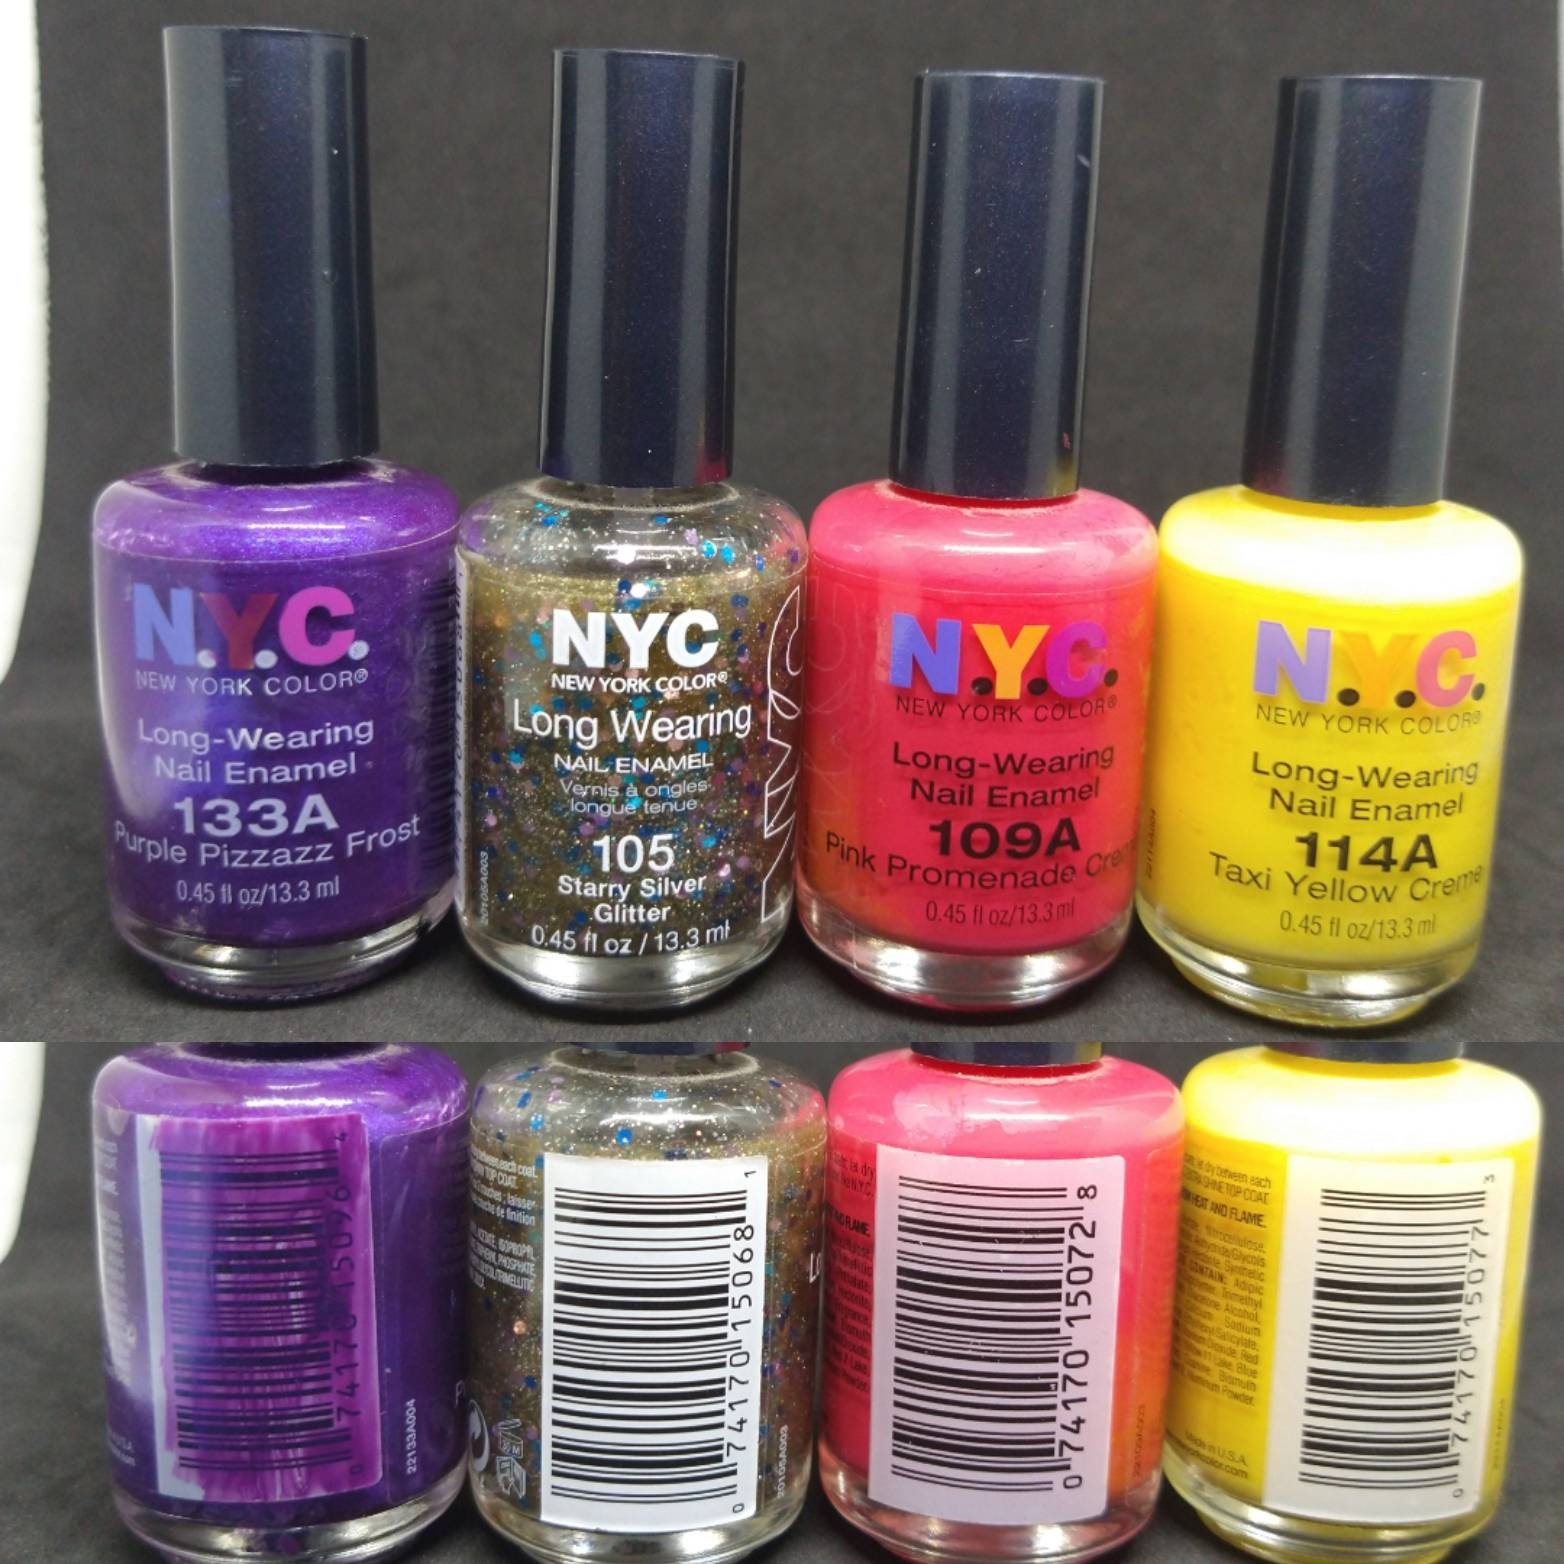 OPI Nail Polish Ingredients Review - I Read Labels For You